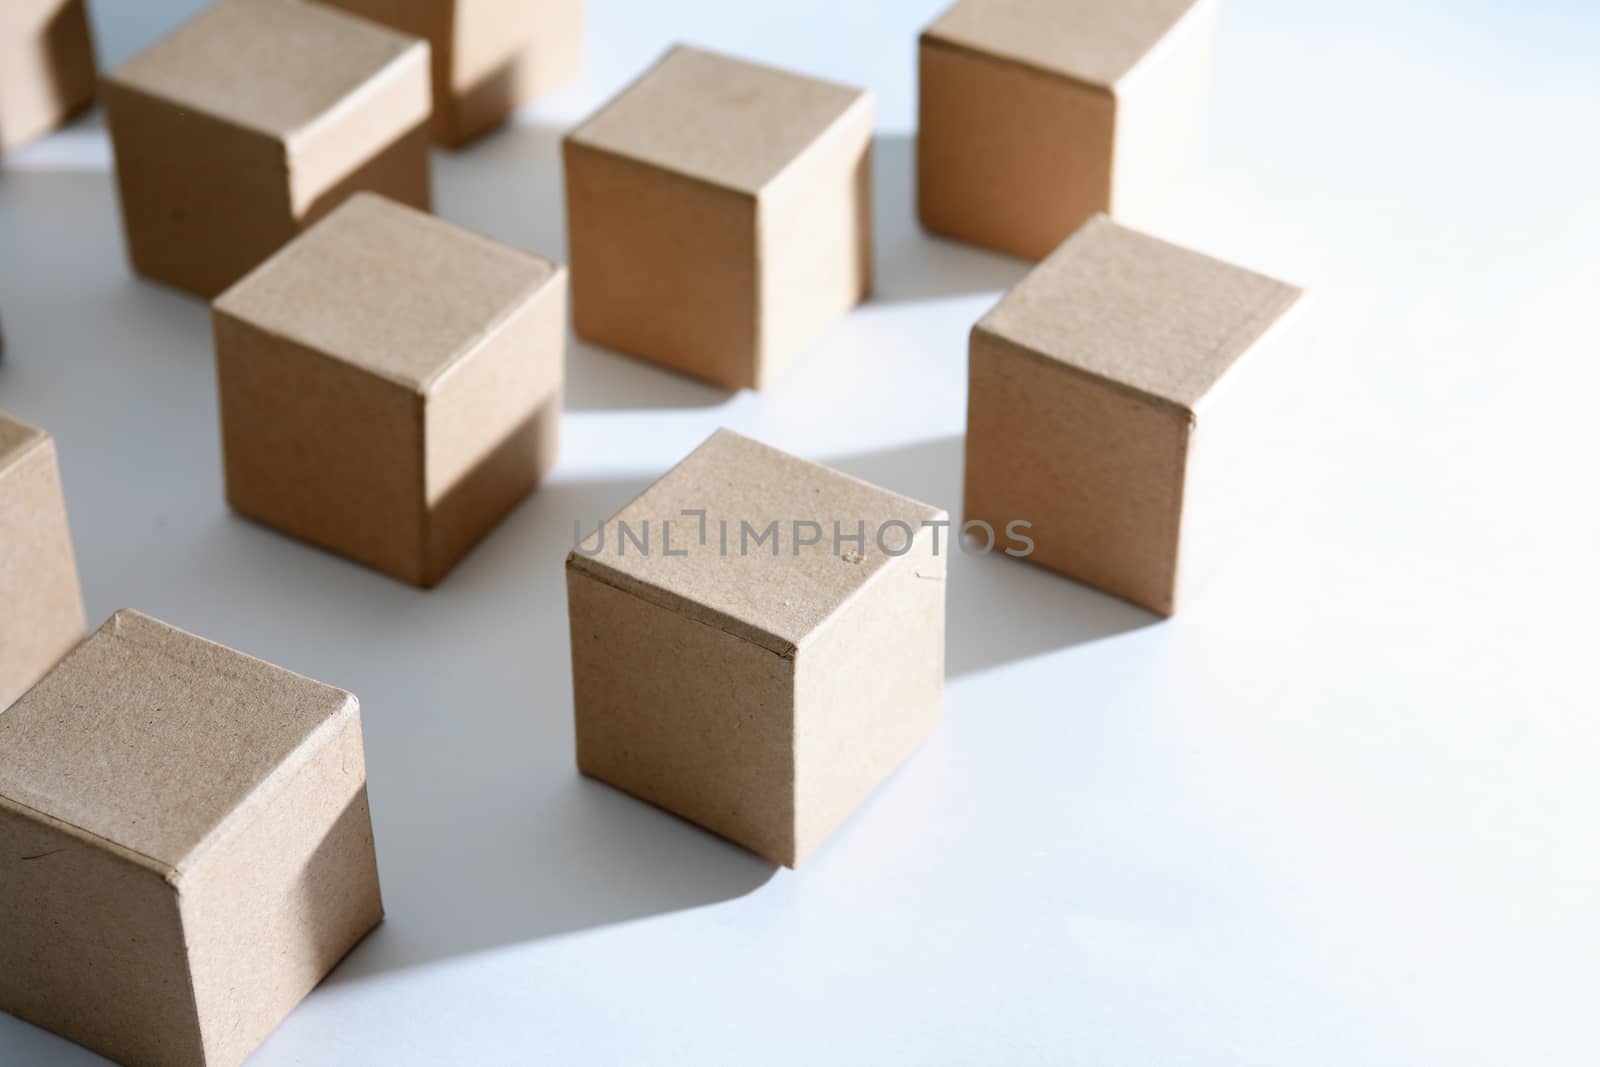 Set of cardboard cubes on white background with light and shadows